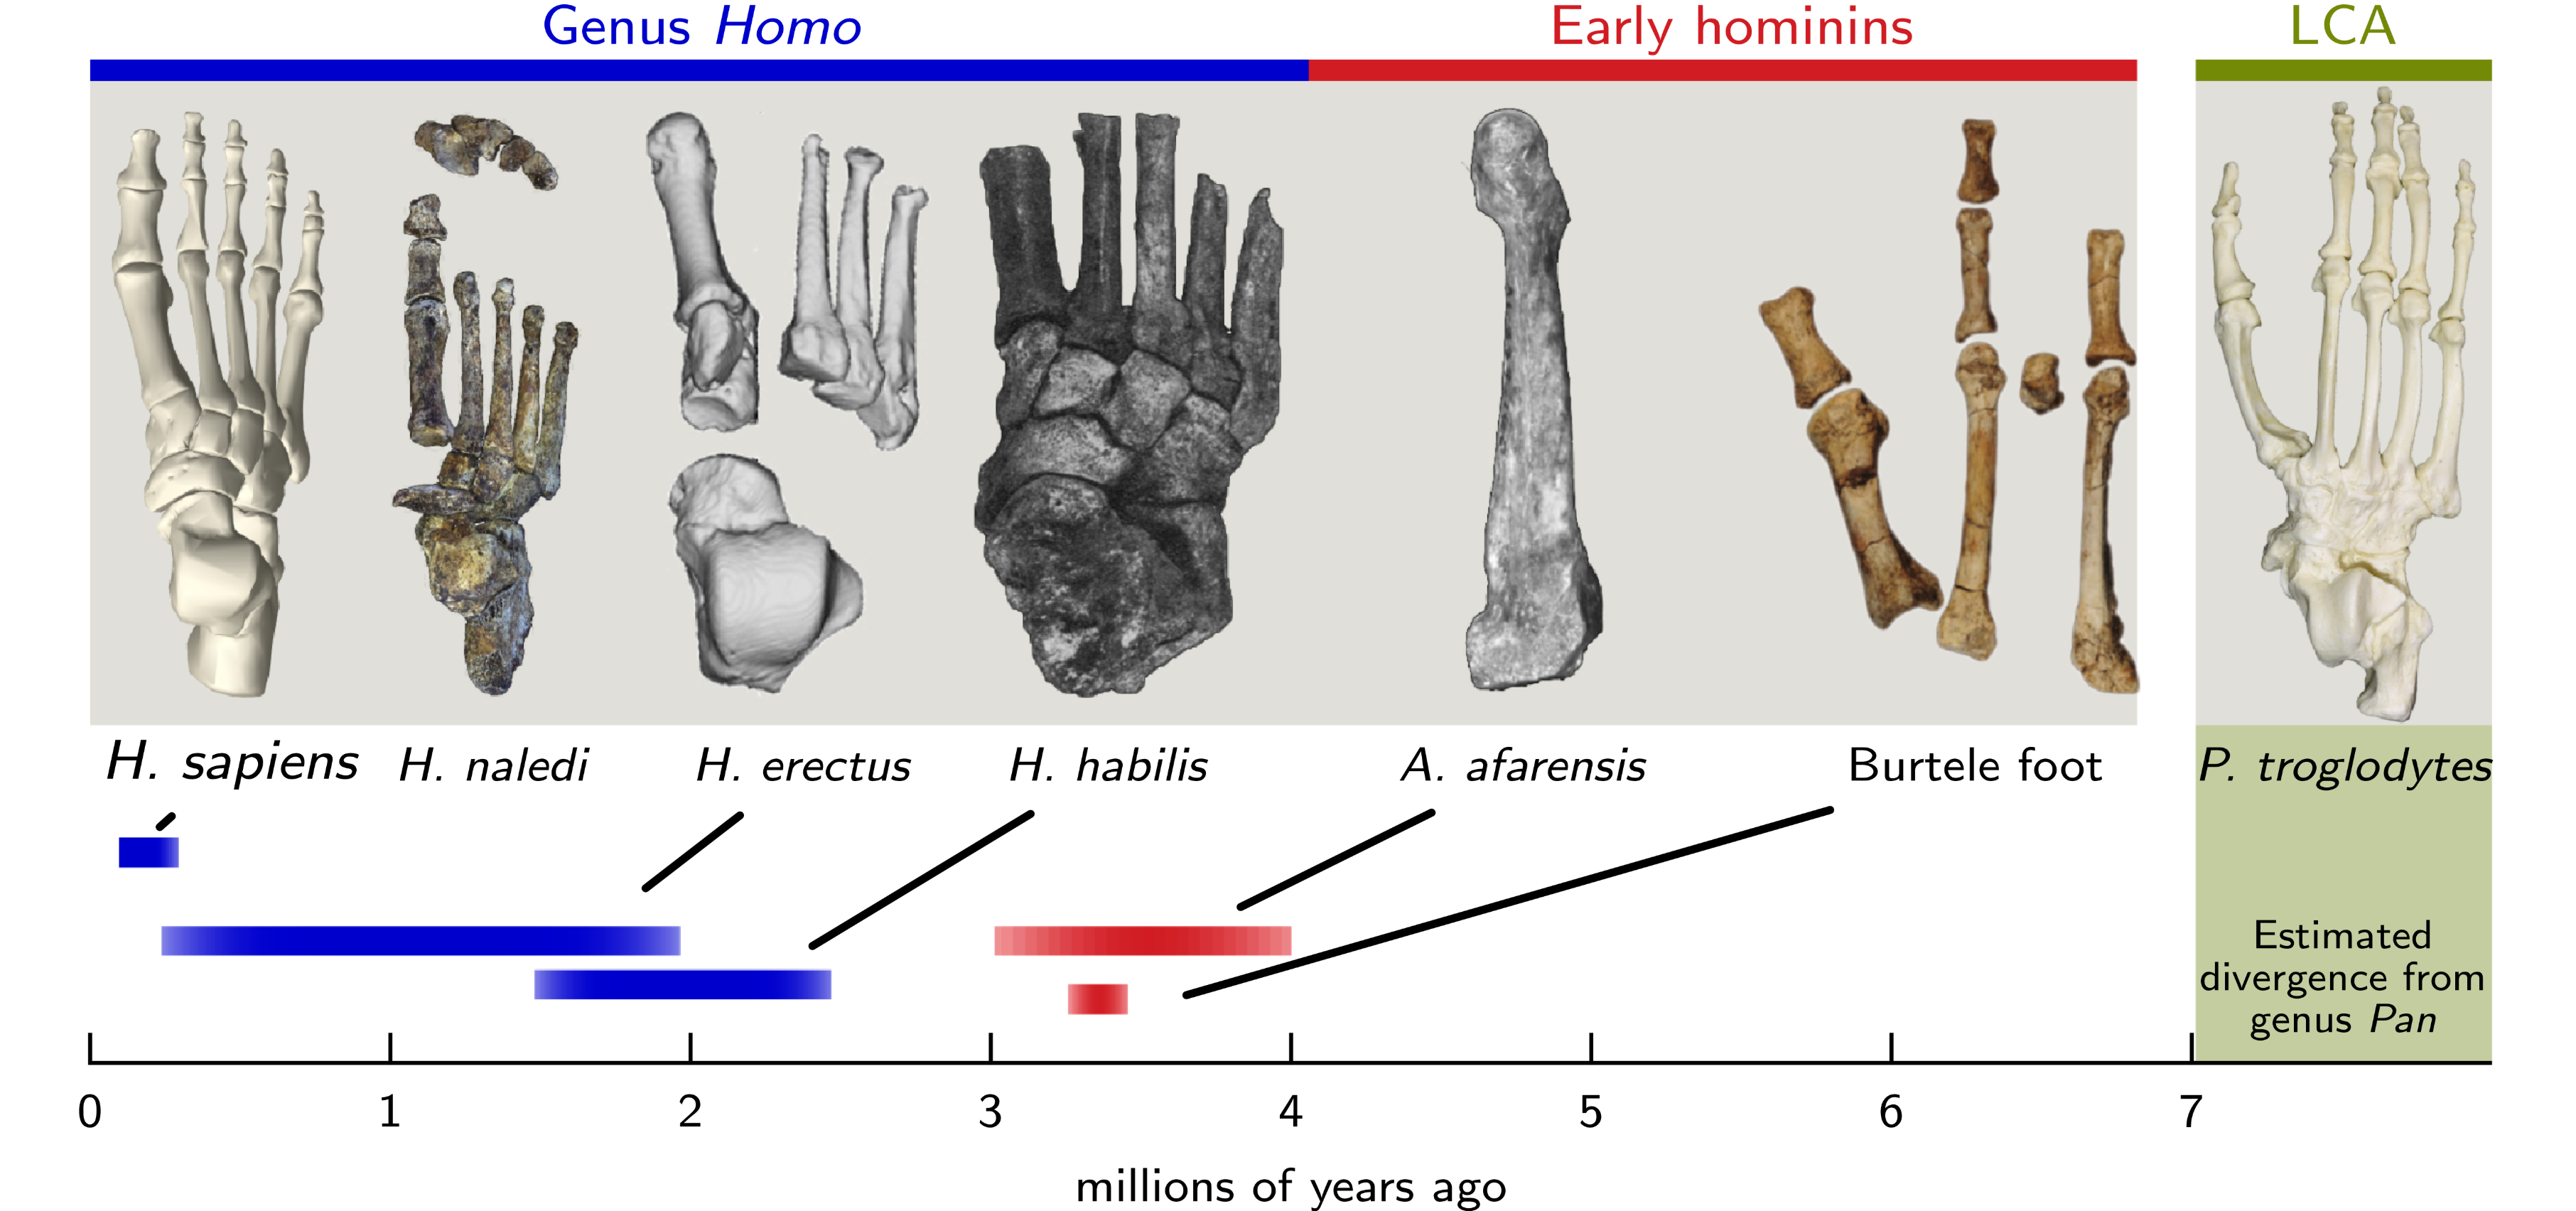 Diagram of fossil feet from different hominin species.